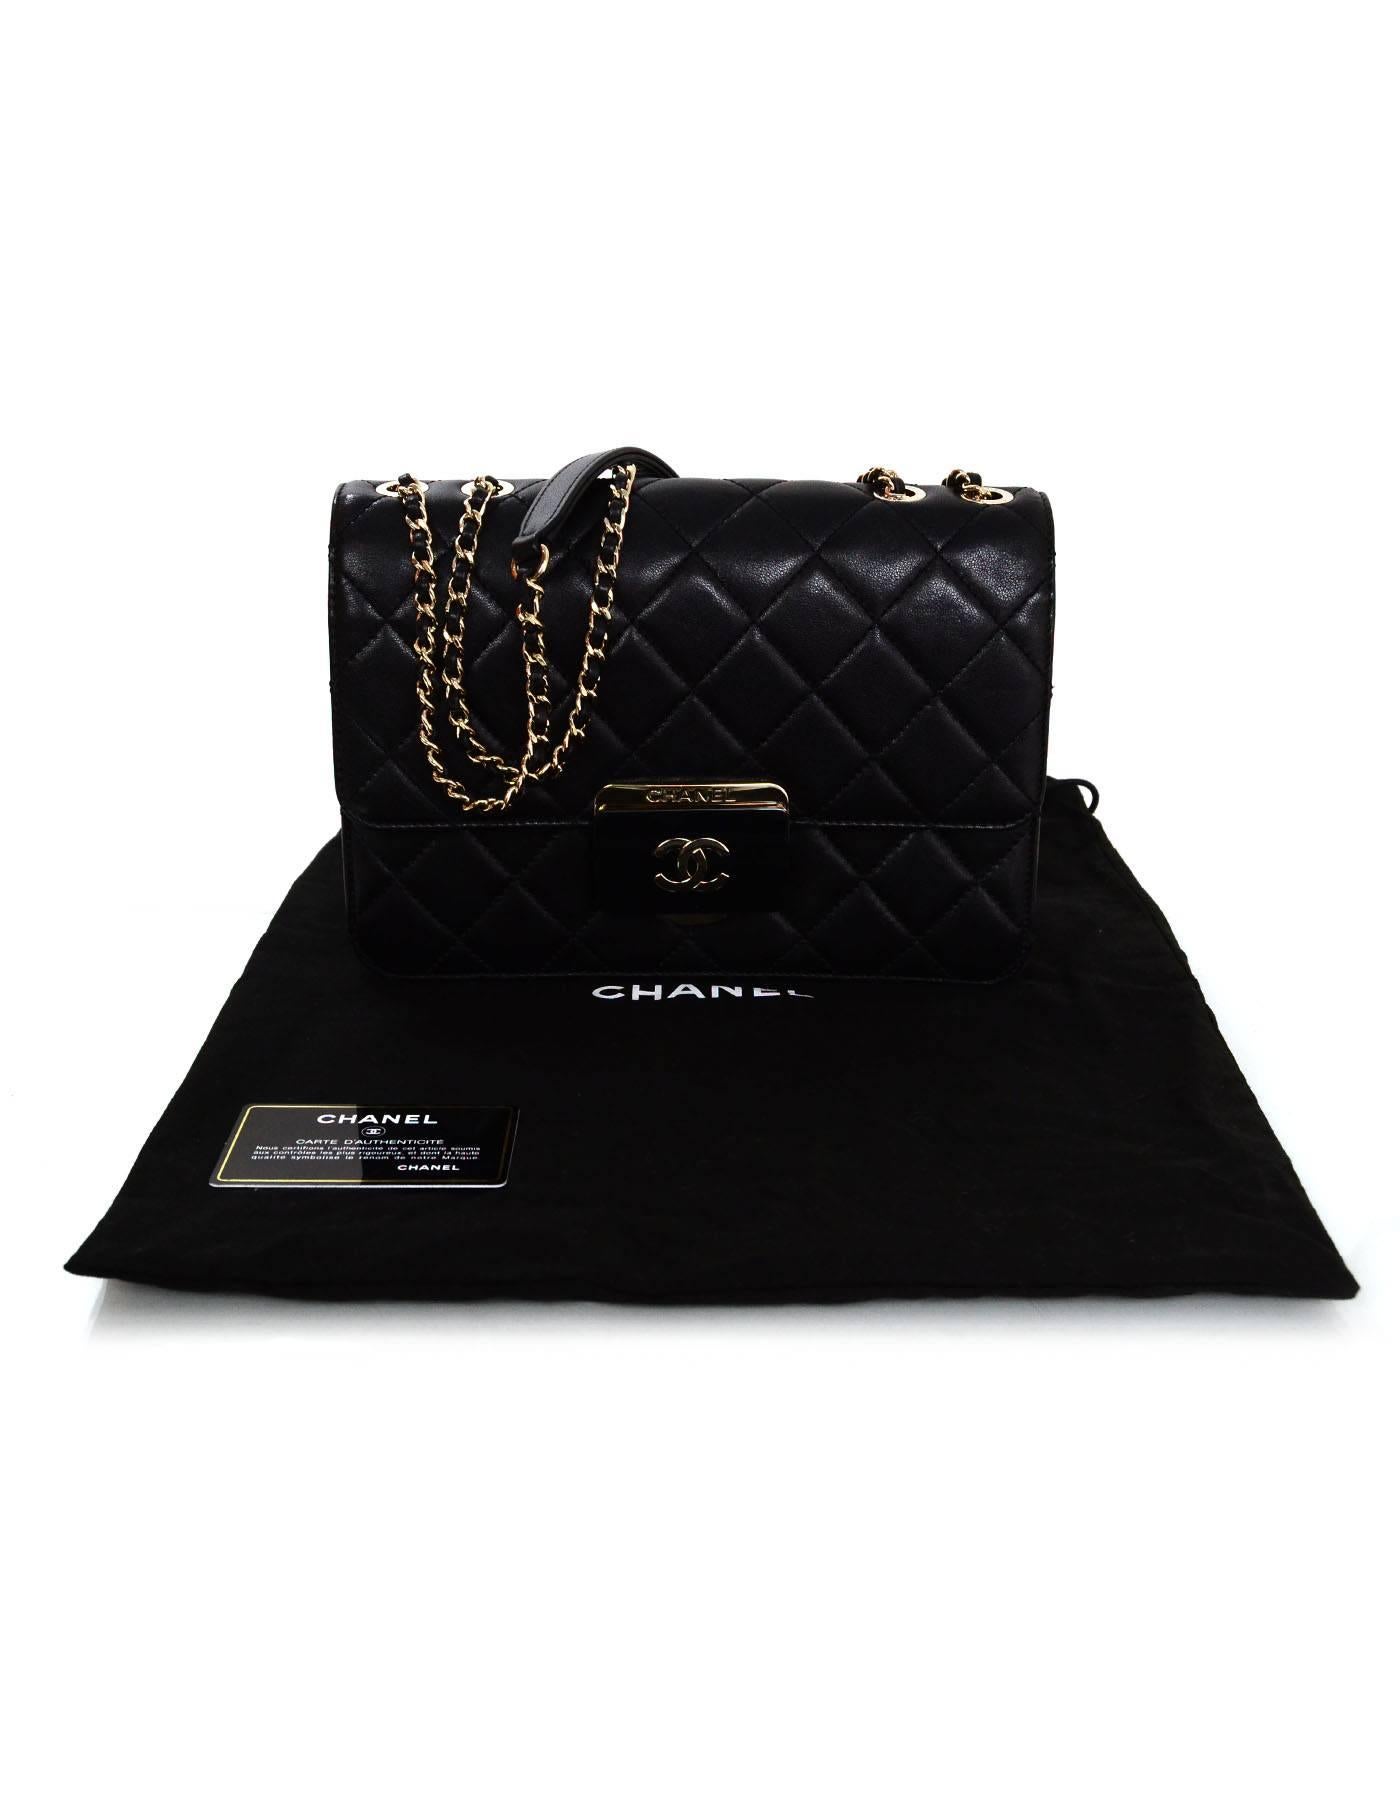 Chanel 2016 Black Quilted Sheepskin Large Beauty Lock Flap Bag rt. $3, 800 4